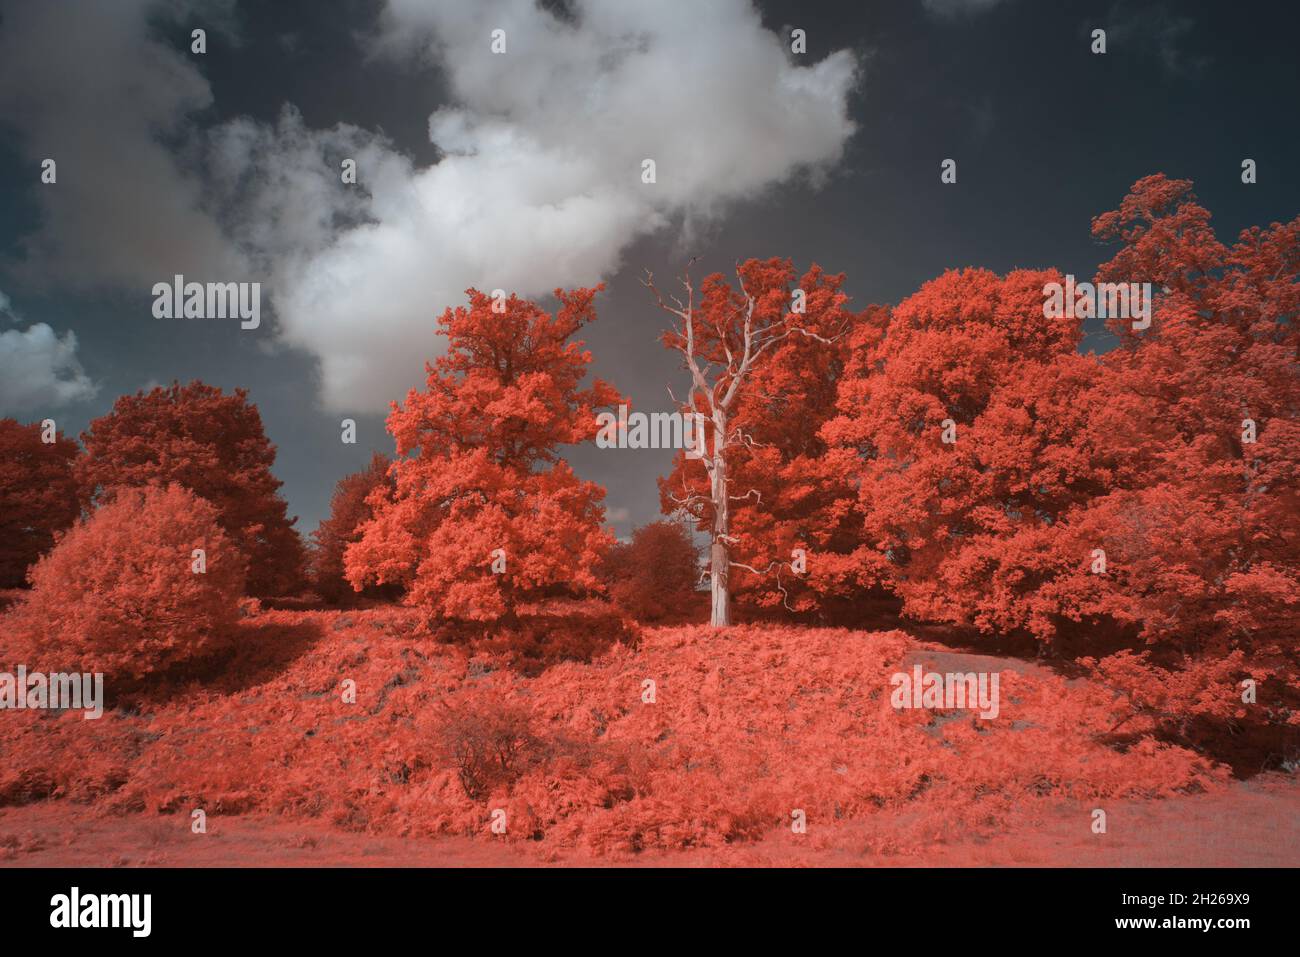 Fagus sylvatica Castanea sativa Quercus robur trees chloroplast in healthy leaf reflect heat infrared daylight and appear red as in aerochrome film Stock Photo